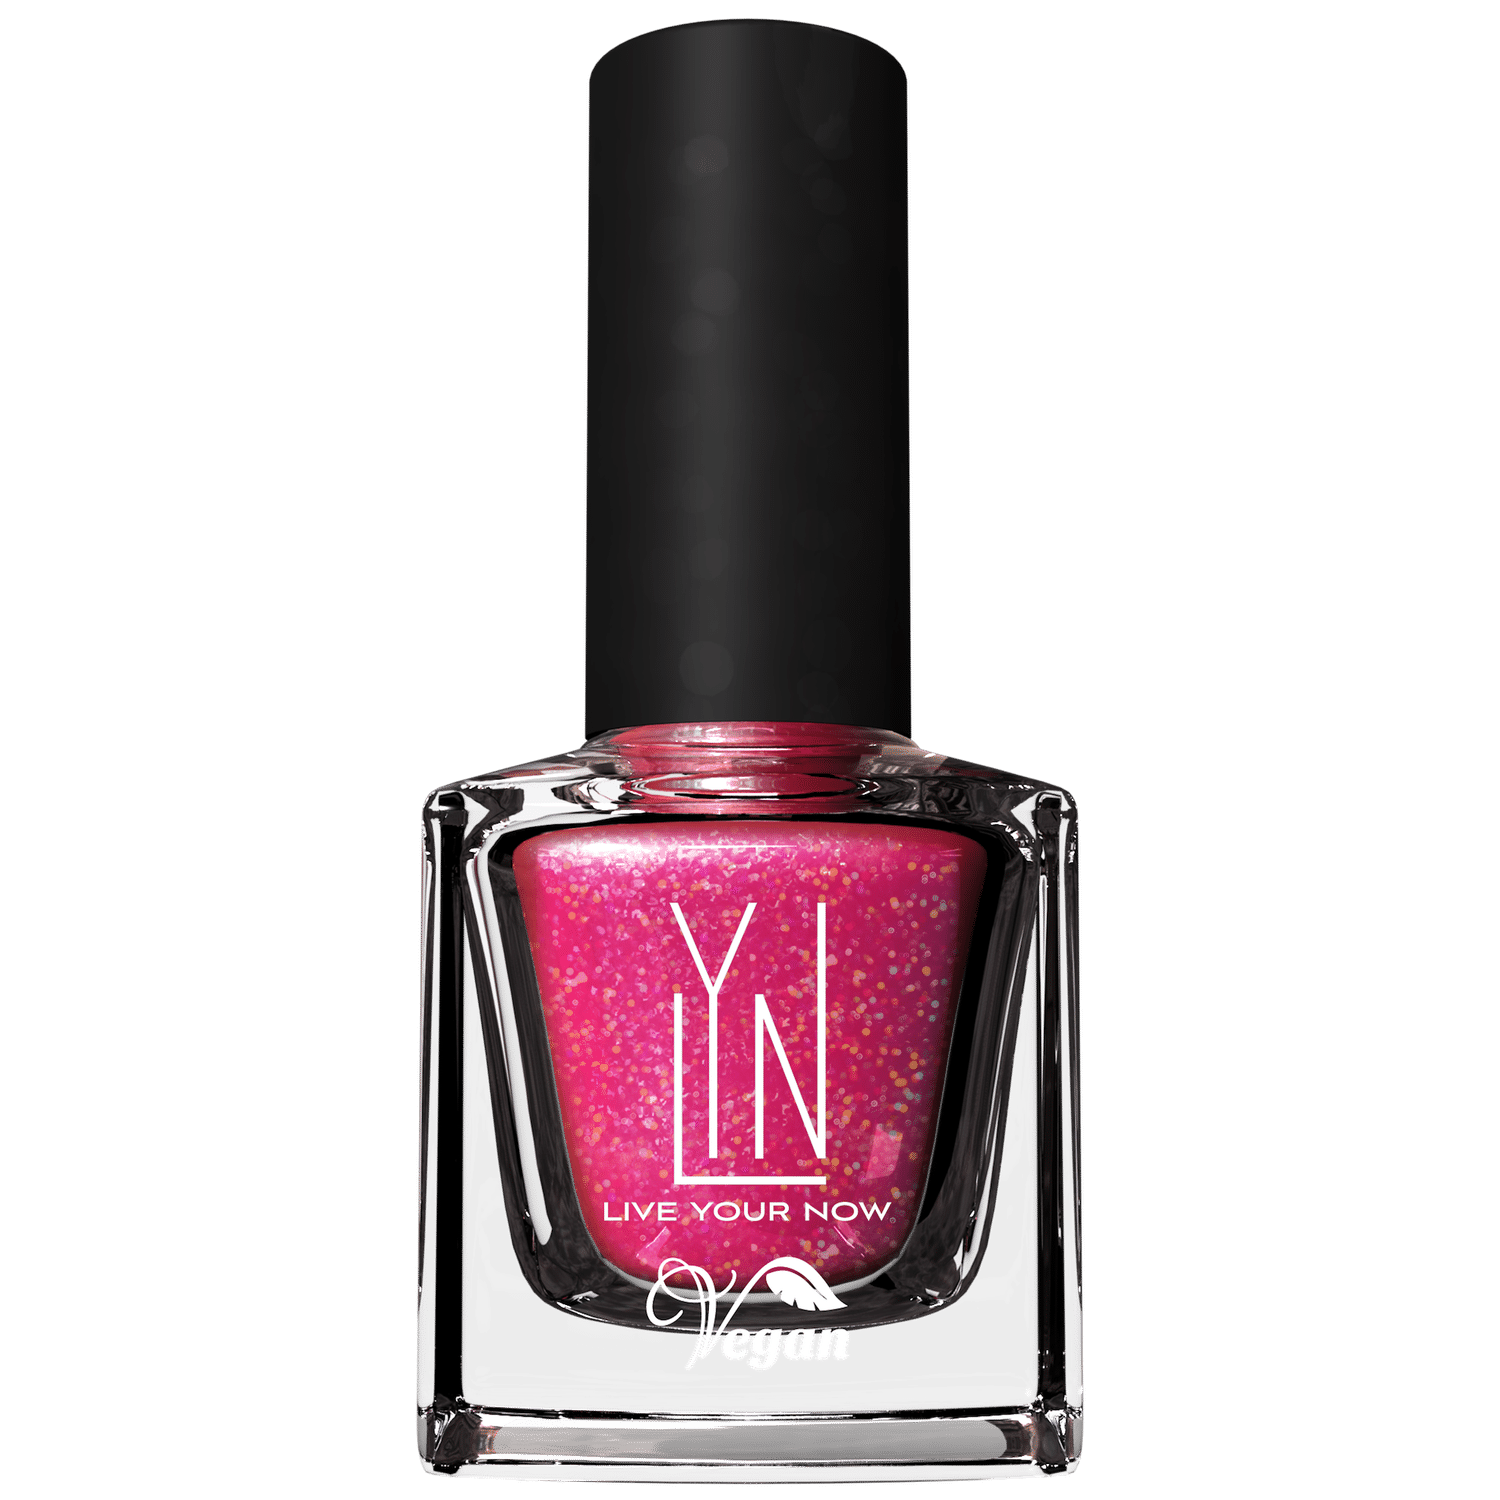 LYN Nail Lacquer Don't Brick My Heart: Review and Swatches